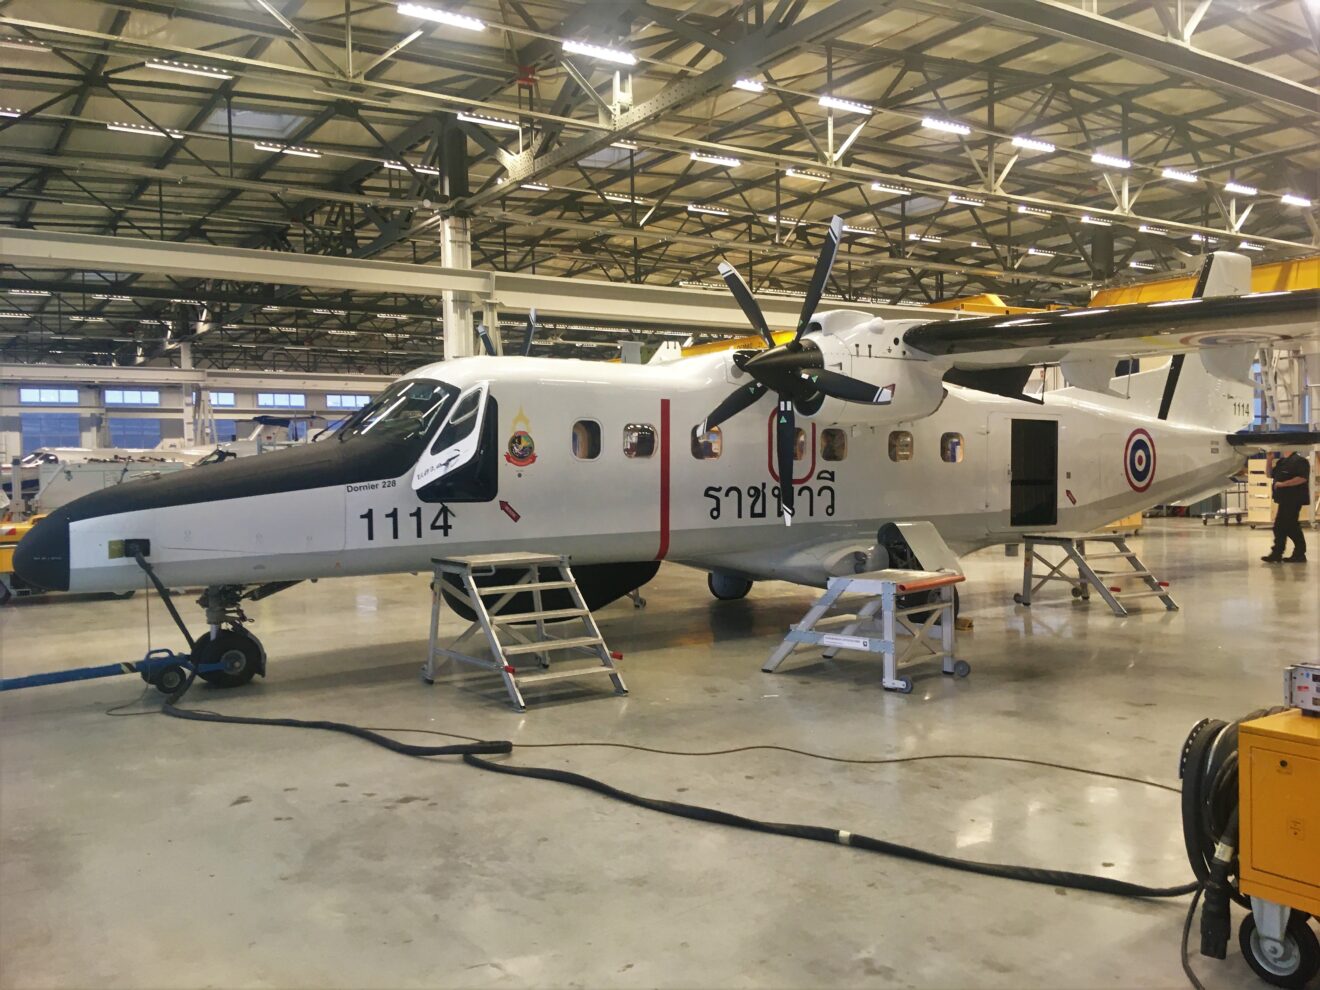 General Atomics AeroTec Systems carries out modernisation of Dornier 228 aircraft for Royal Thai Navy